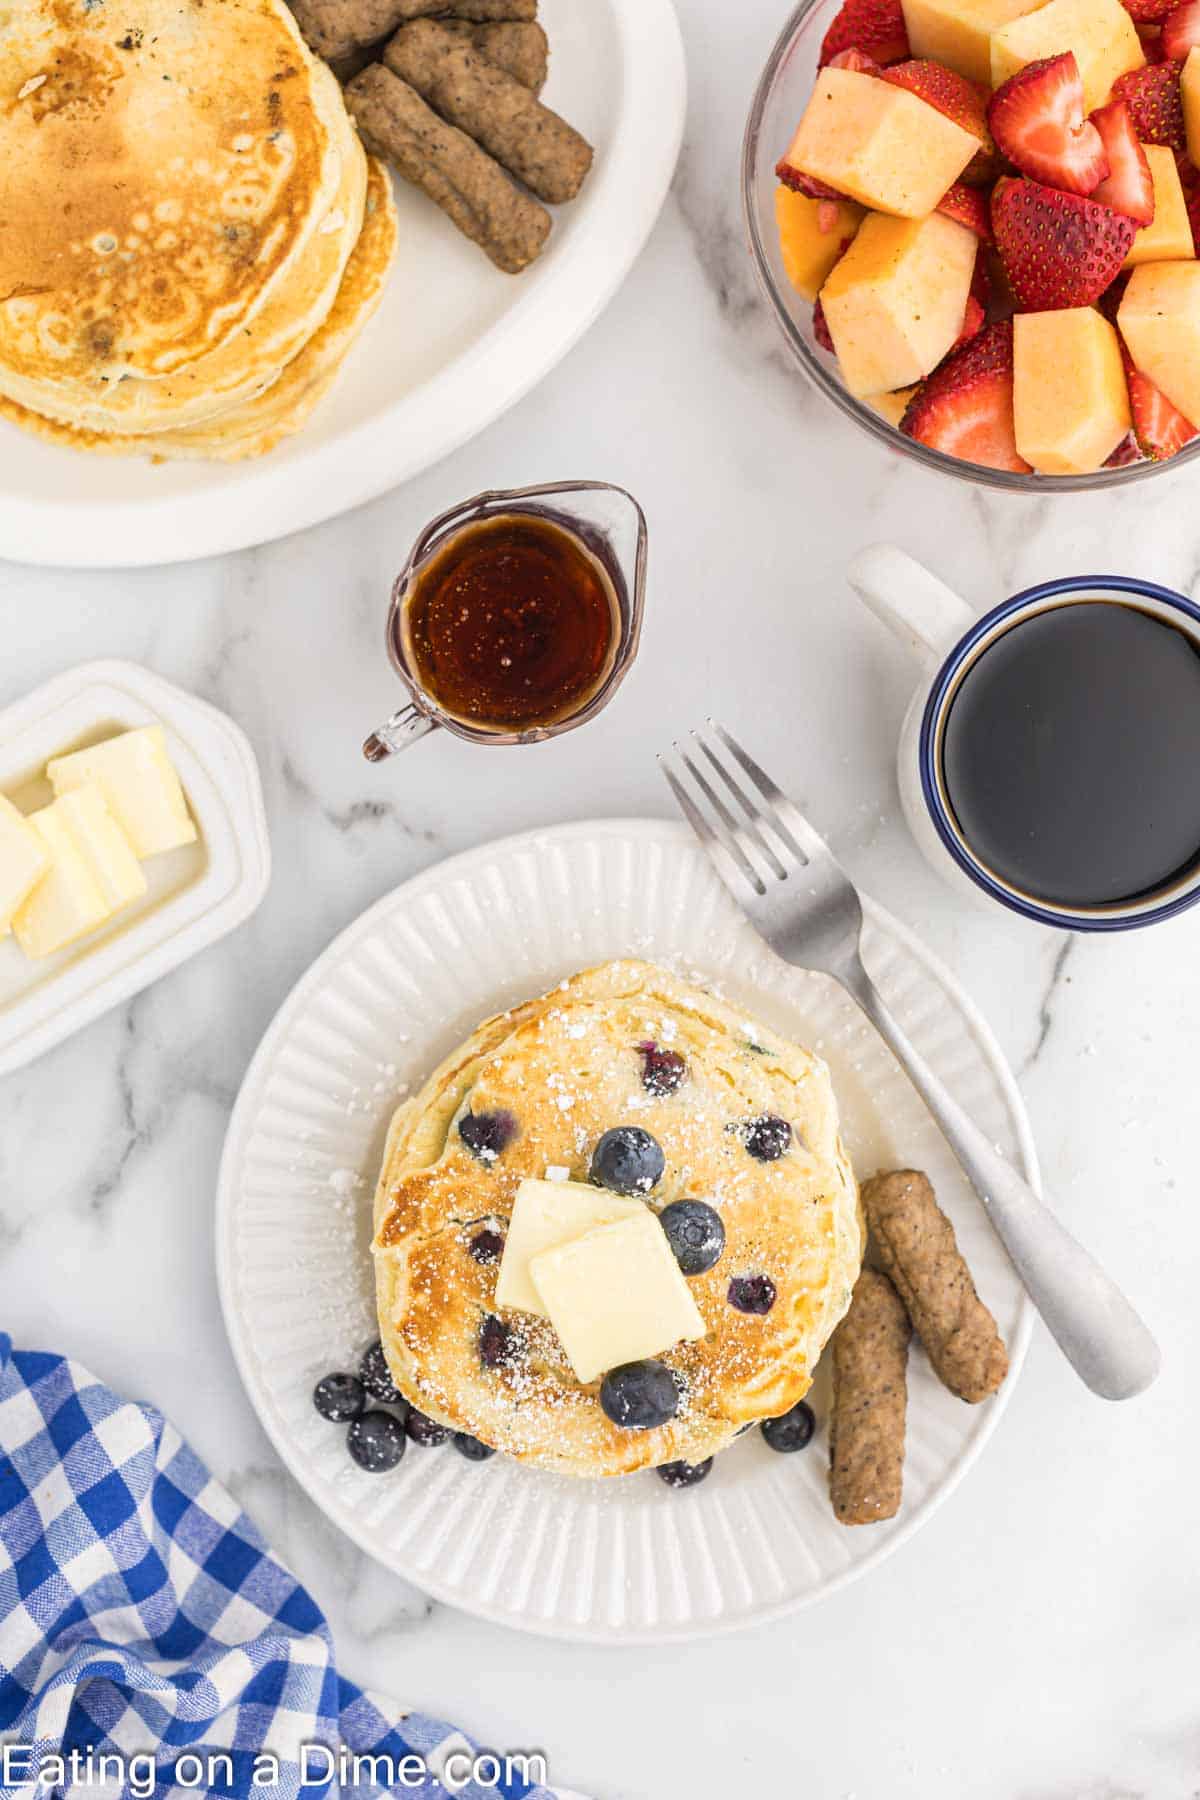 Blueberry pancakes stacked on a plate topped with butter, with a side of sausage links. A bowl of syrup, a cup of coffee and a bowl of fresh fruit is on the side